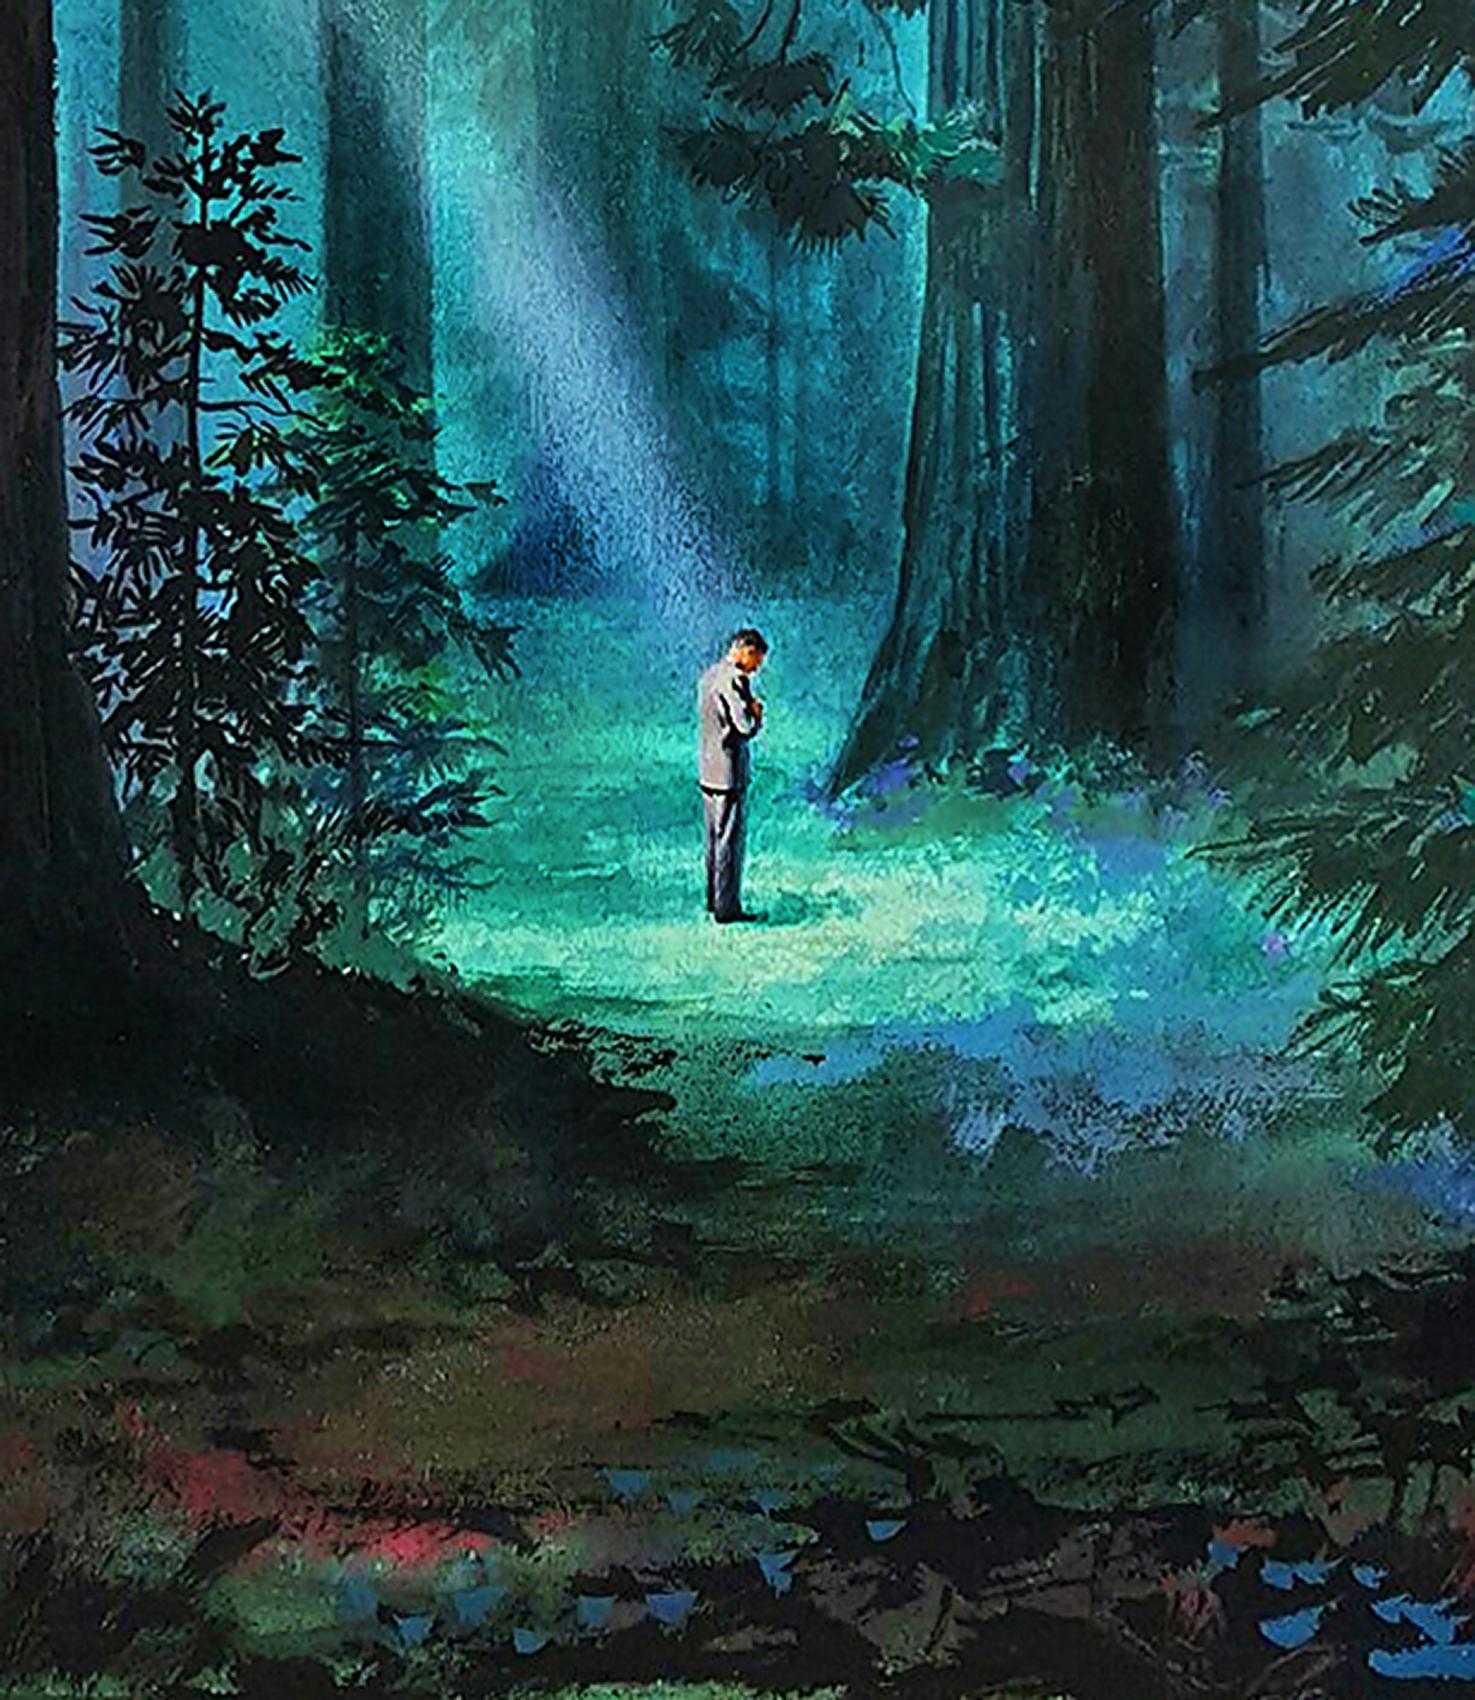 A ray of light in the forest - Surreal Man in Surreal Landscape  - Painting by Hector Garrido